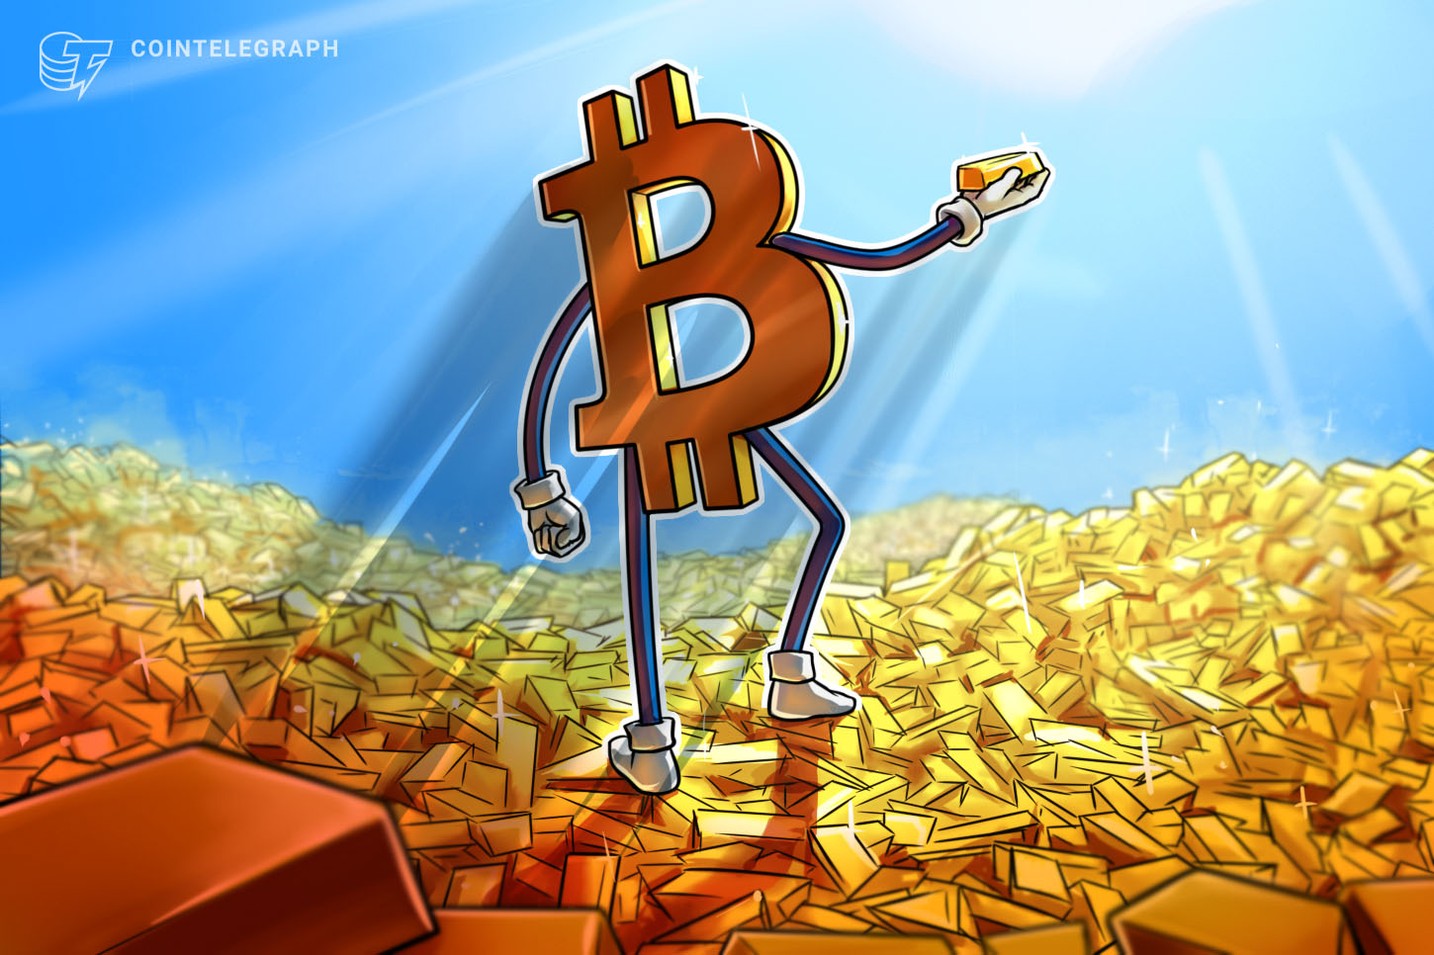 Bitcoin erases Fed losses as traders eye $40K BTC price target